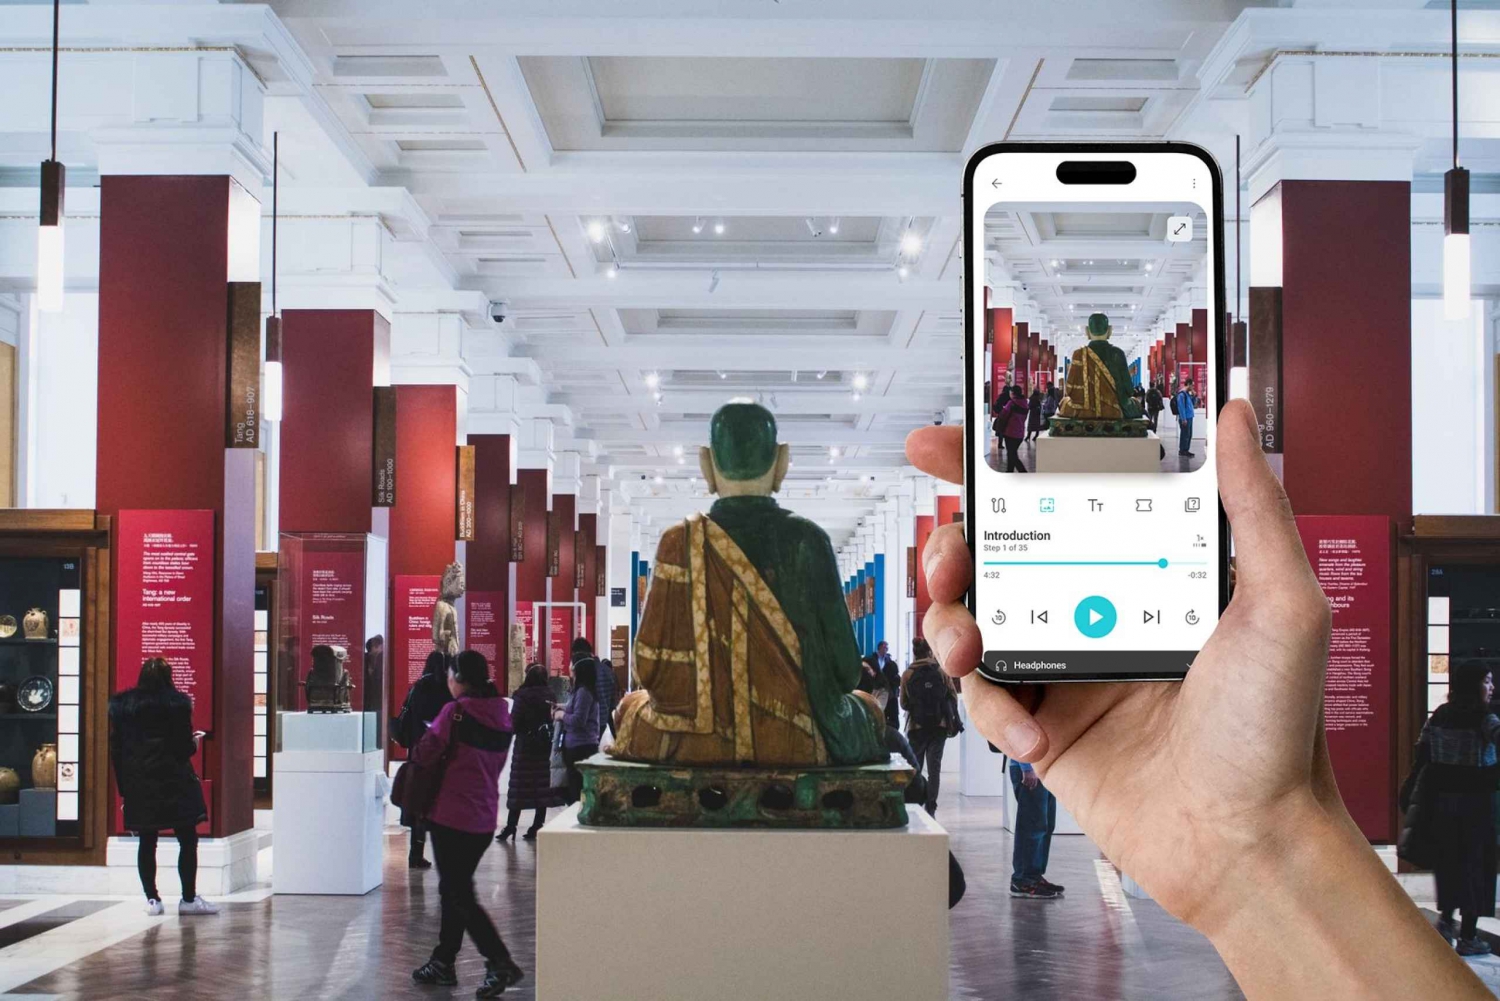 London: British Museum Highlights In-App Audioguide